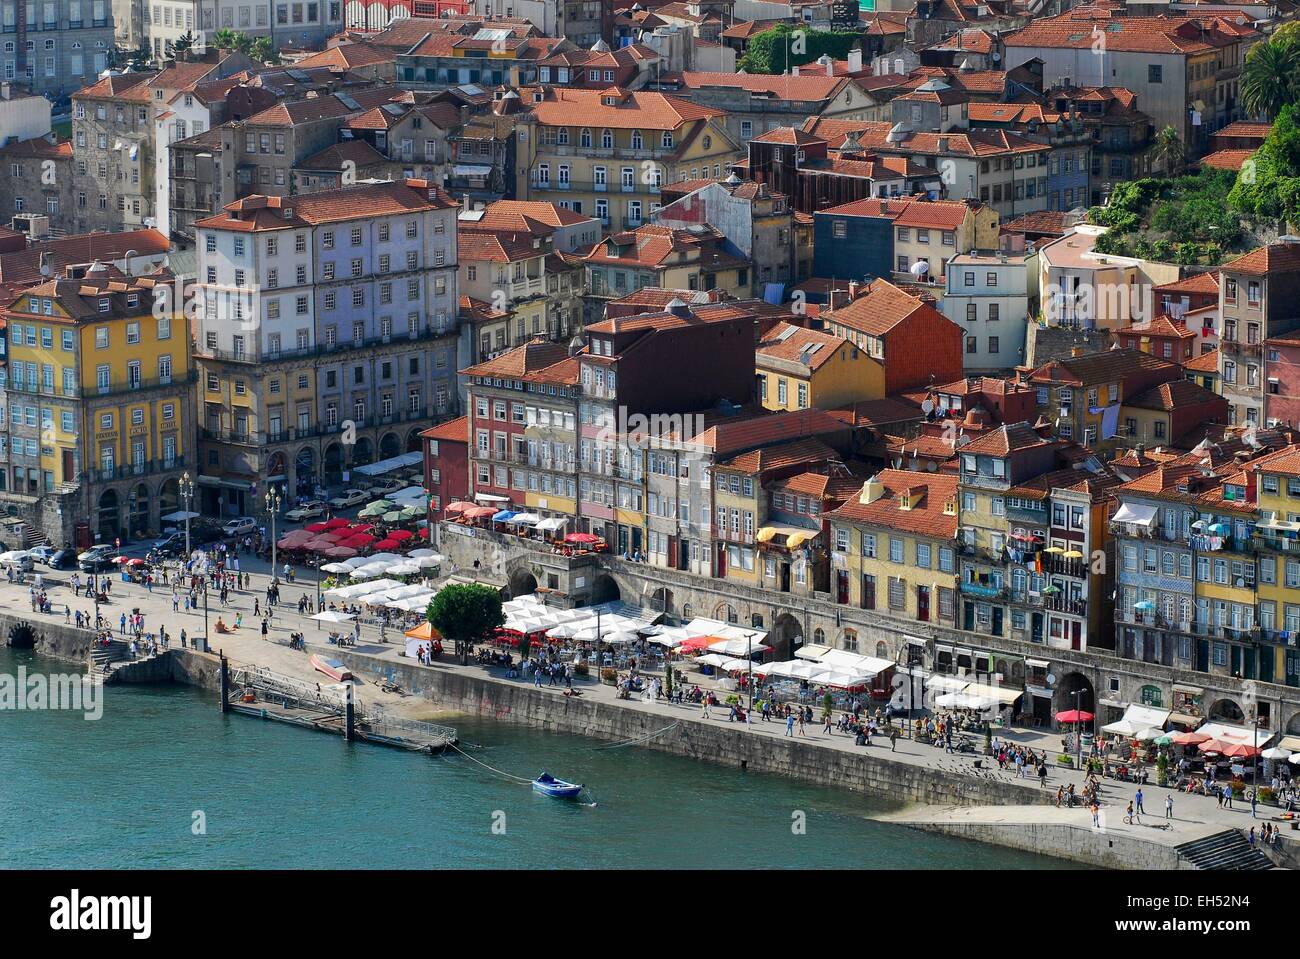 Portugal, North Region, Porto, historical center listed as World Heritage by UNESCO, Cais de Ribeira historic district Stock Photo